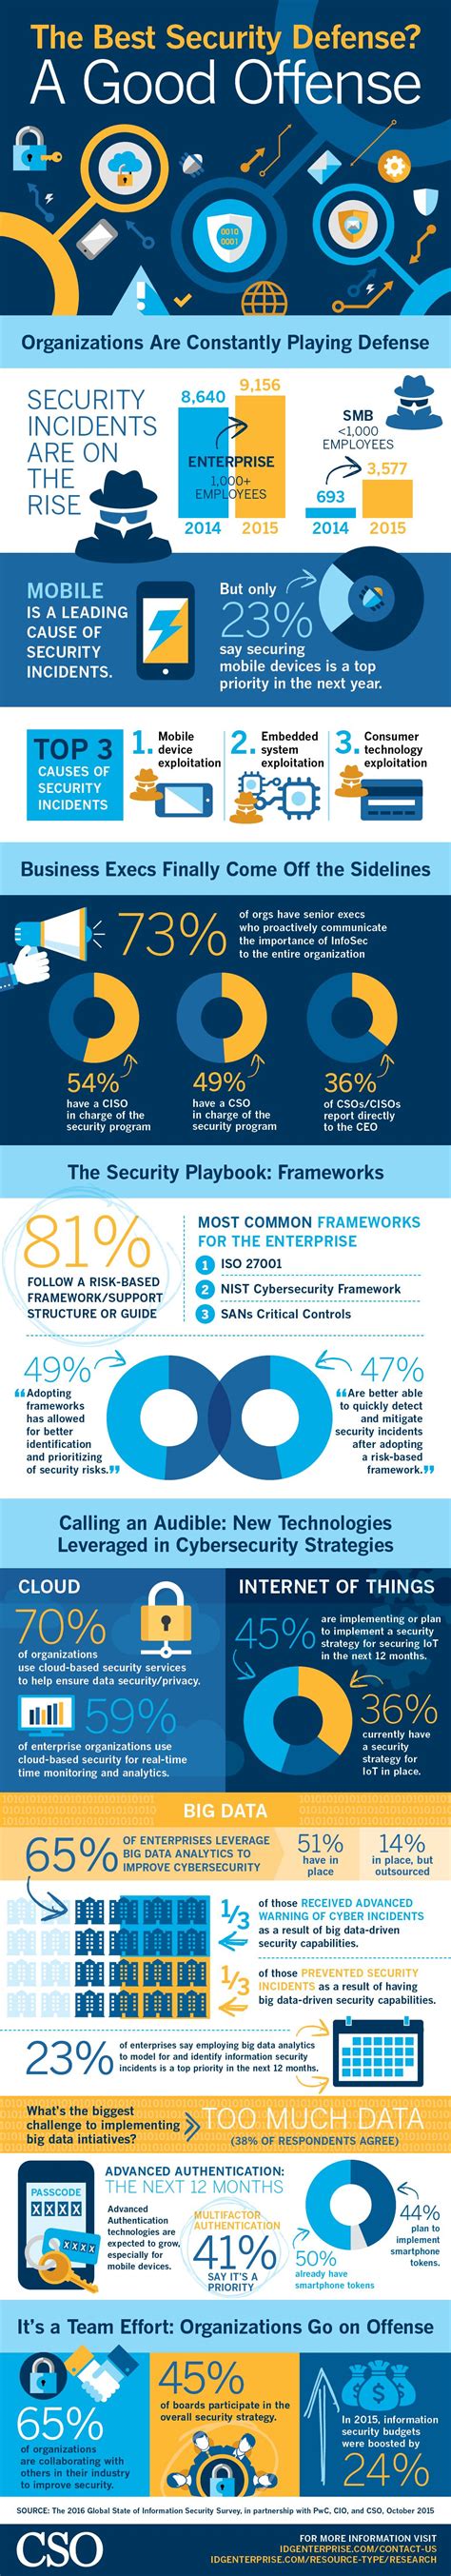 Infographic Based On Csos 2016 Global State Of Information Security